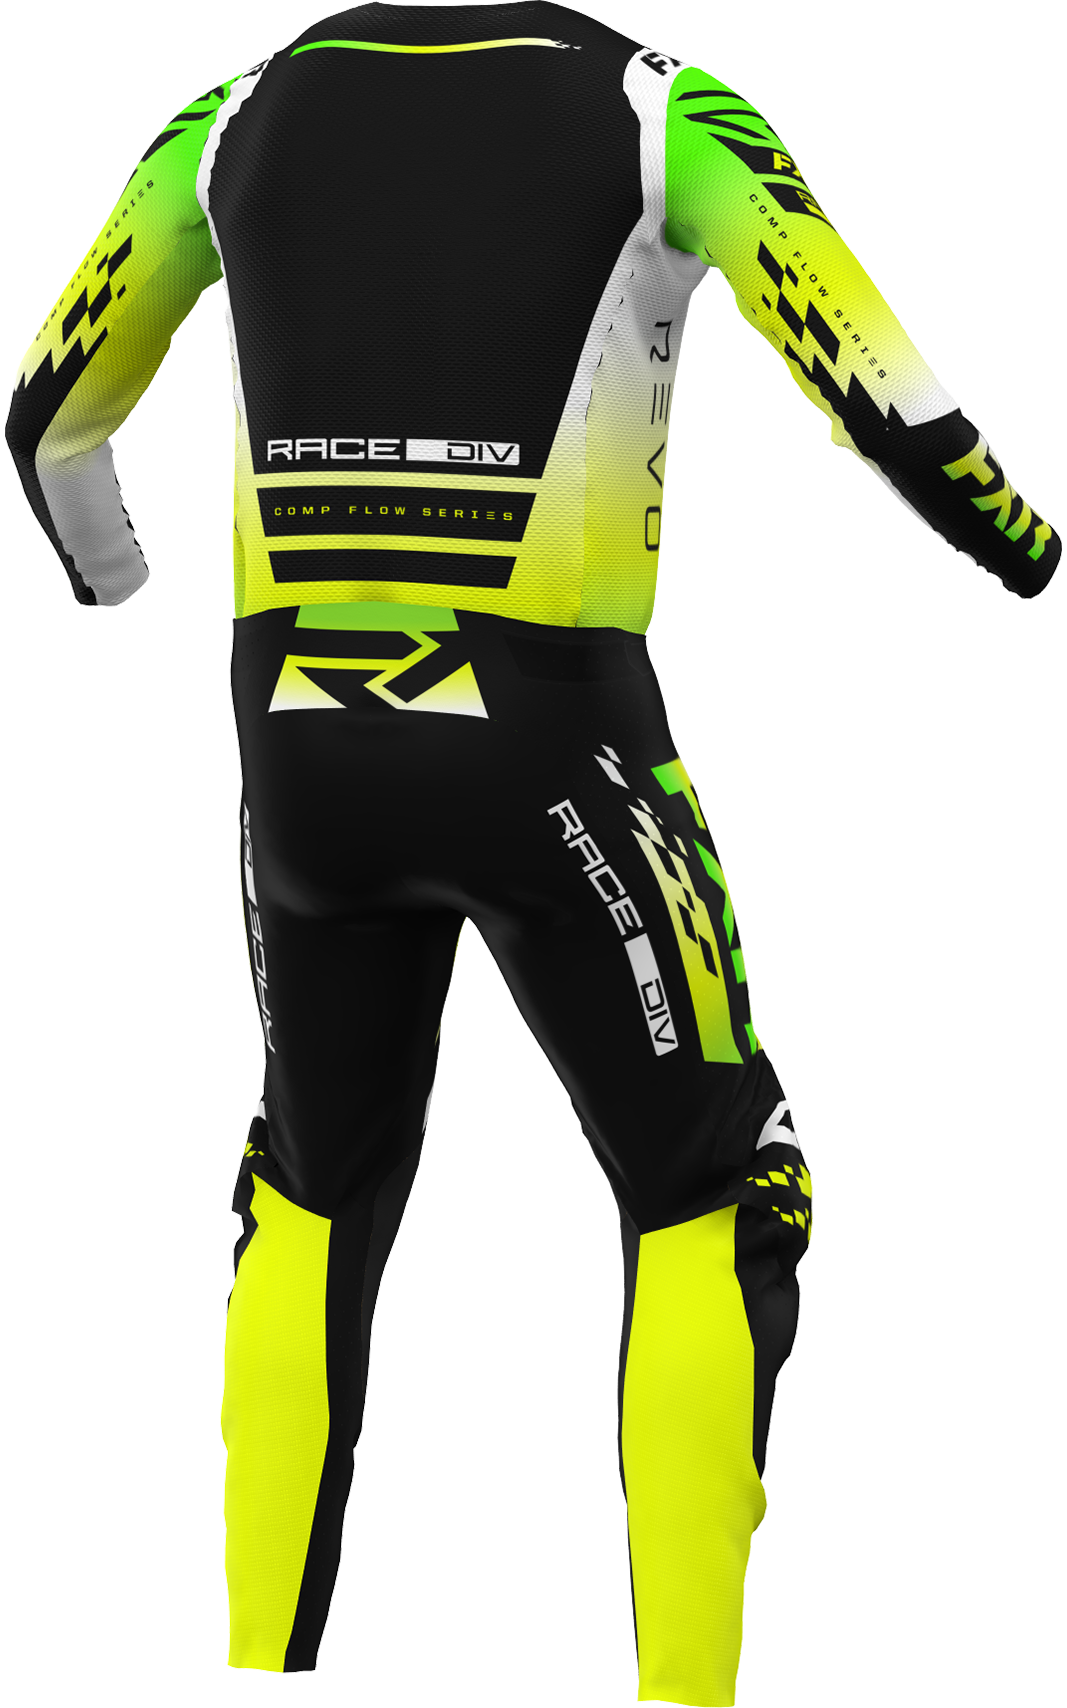 A 3D image of FXR's Revo Comp MX Jersey and Pant in Glowstick colorway